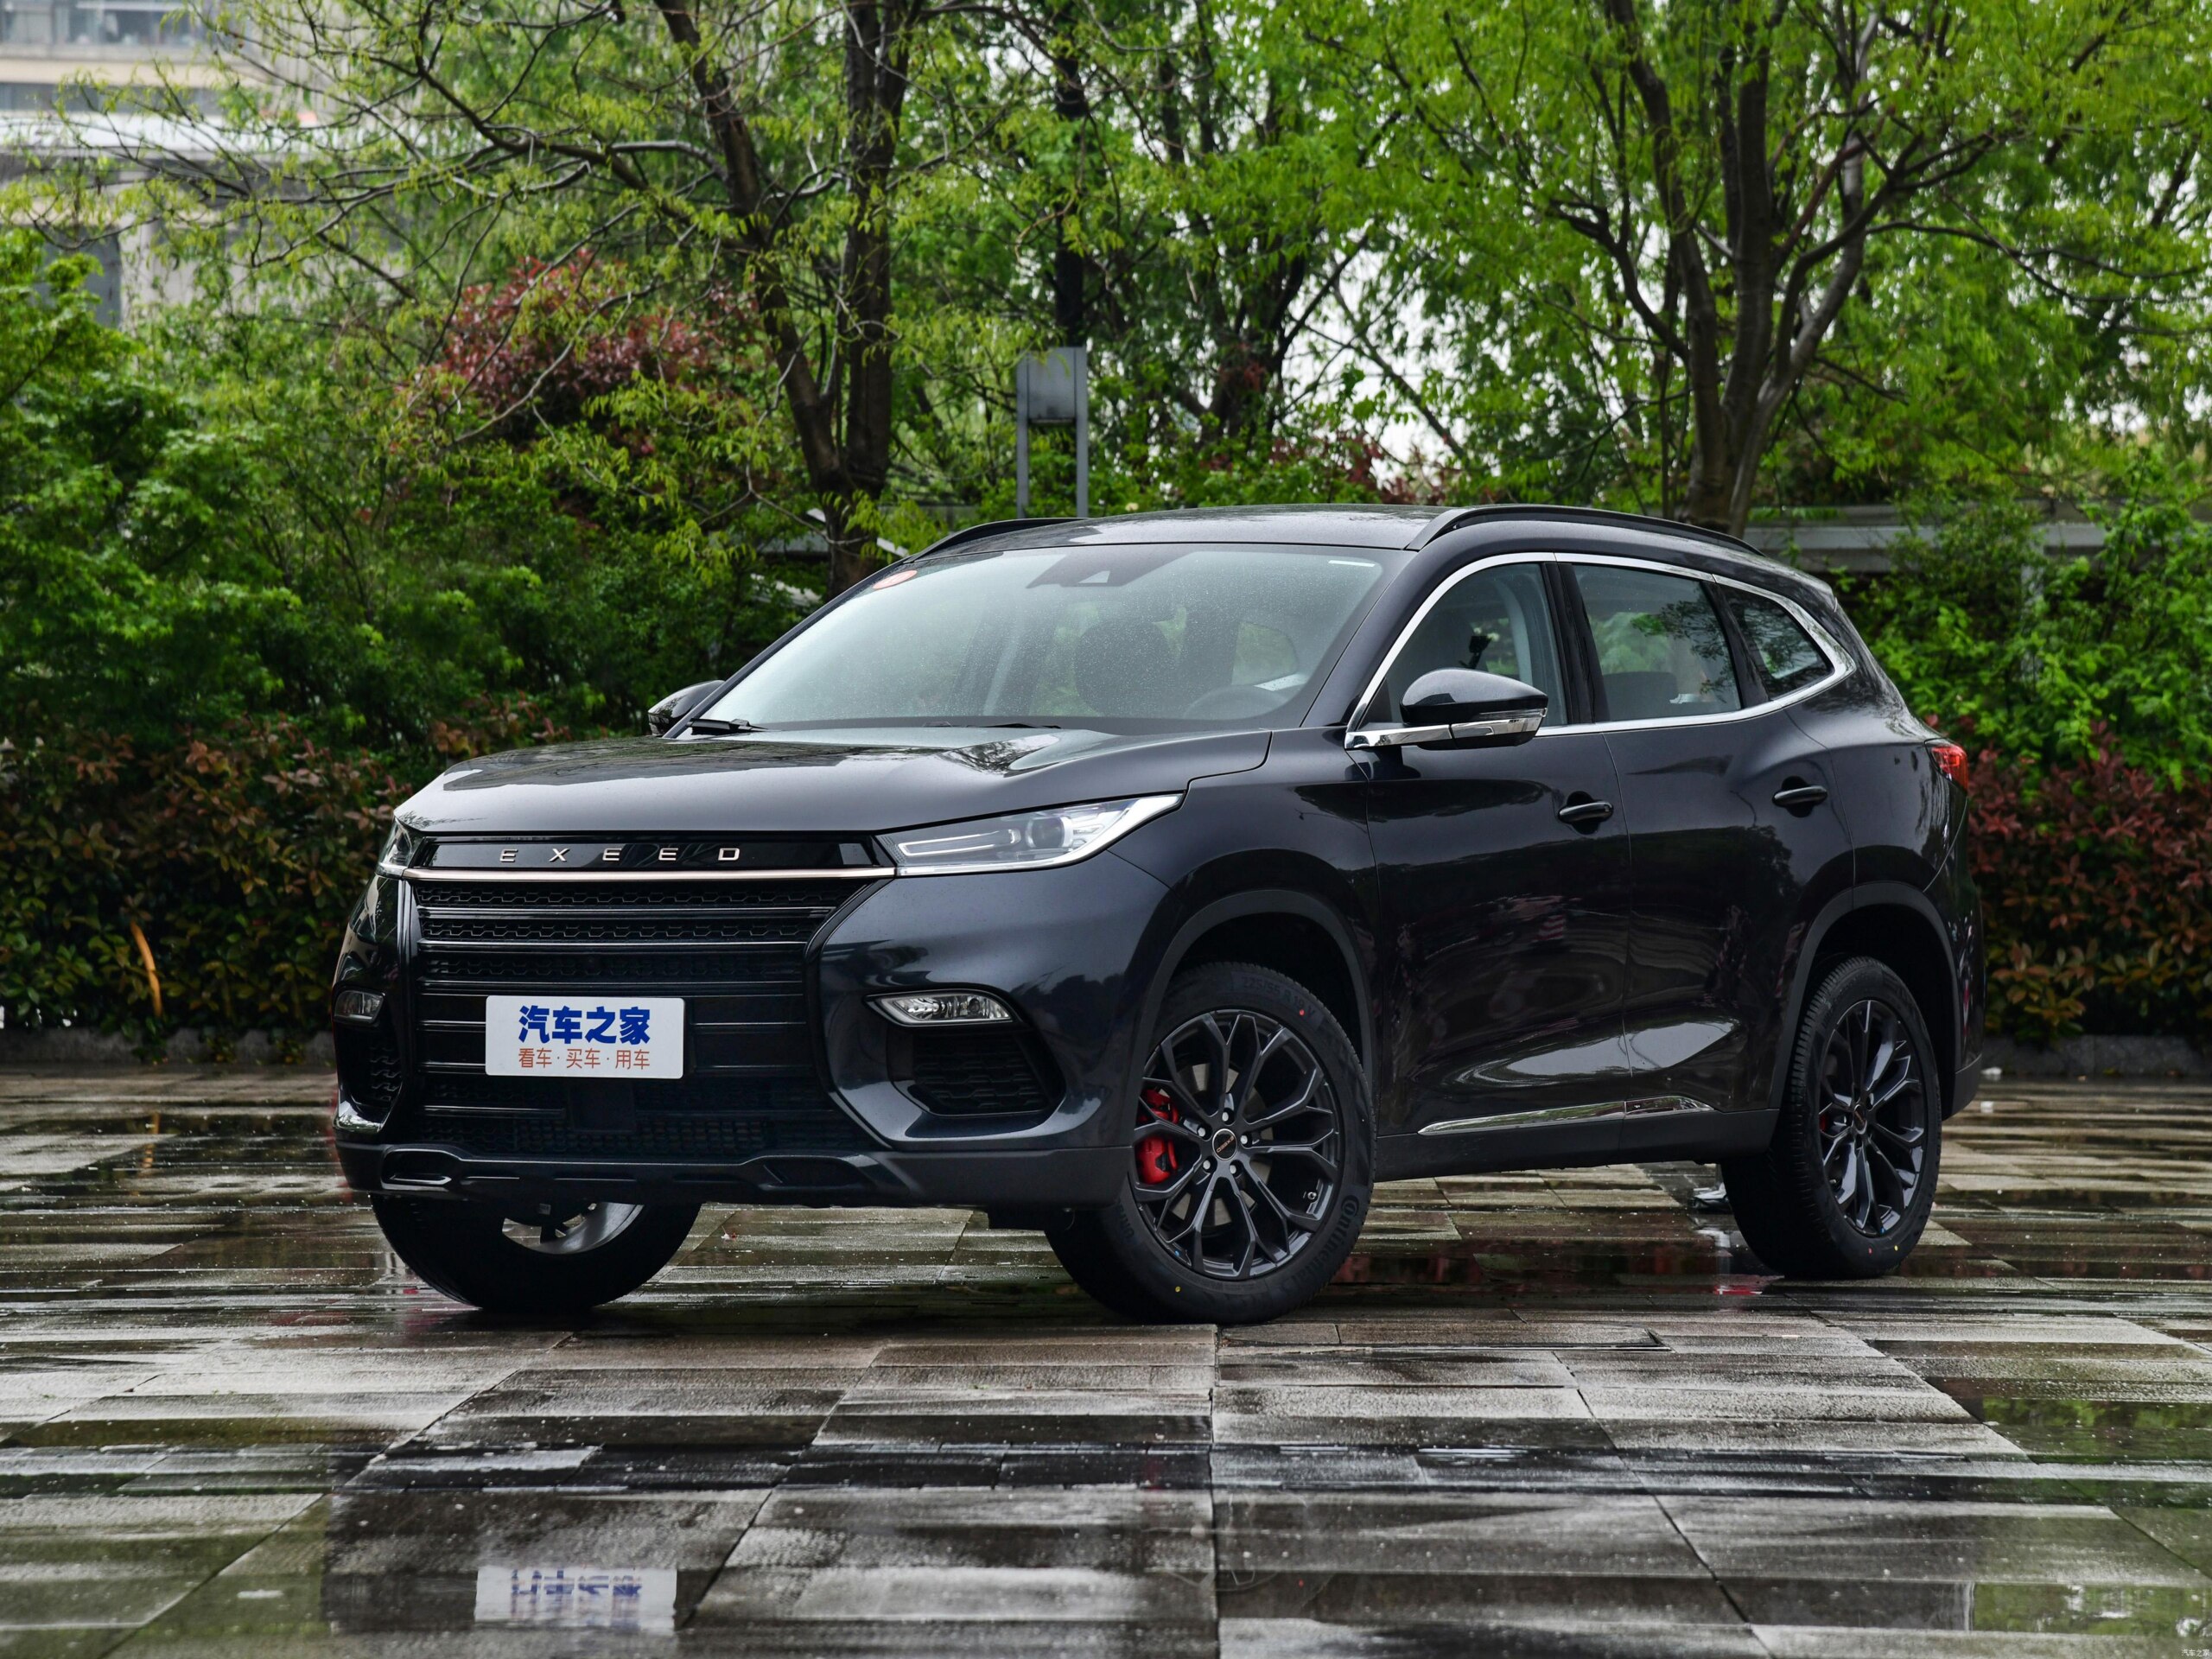 Exceed 2.0 sport edition. Chery Exeed TX. Chery кроссовер 2021. Chery exceed TX 2019. Exeed VX 2022.